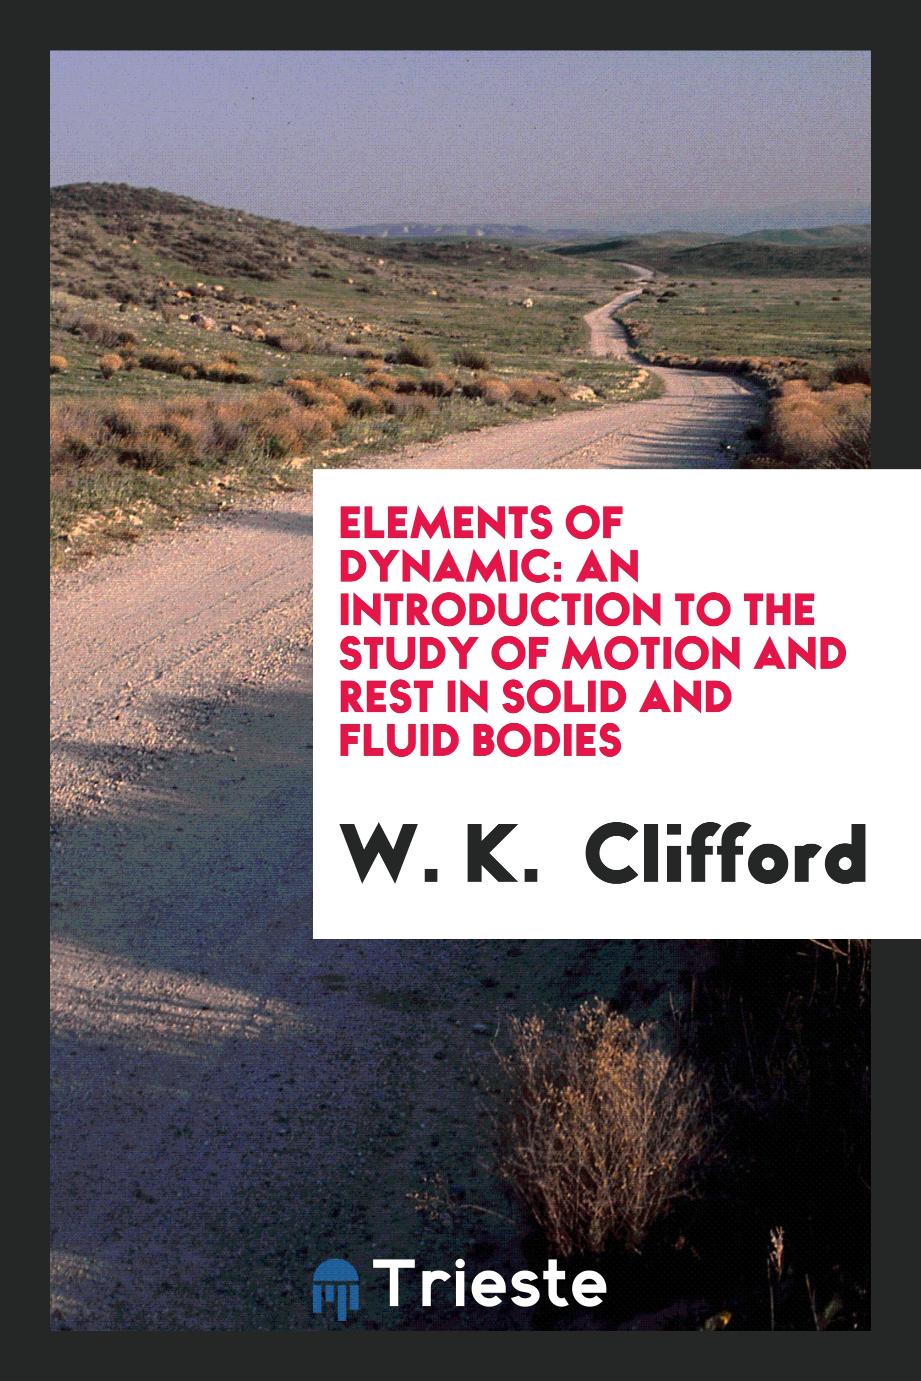 Elements of dynamic: an introduction to the study of motion and rest in solid and fluid bodies